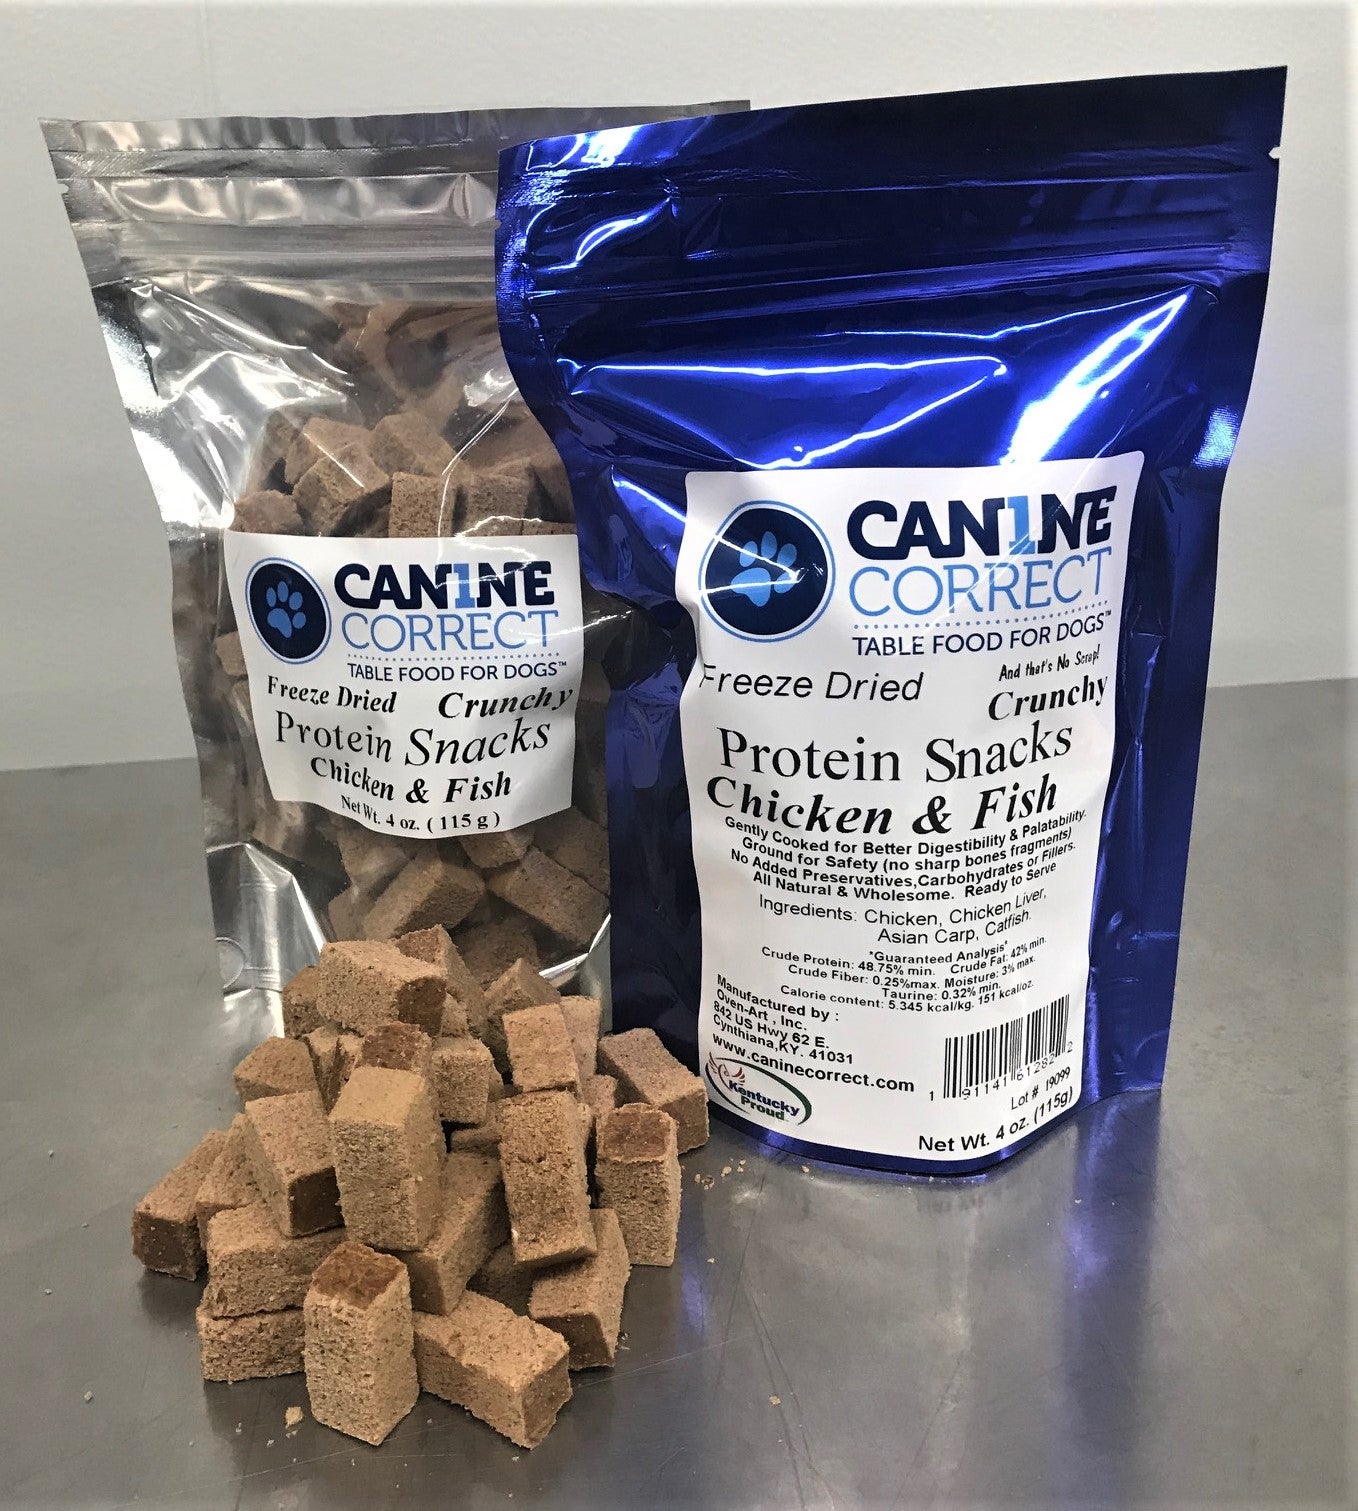 Canine Correct Protein Snacks